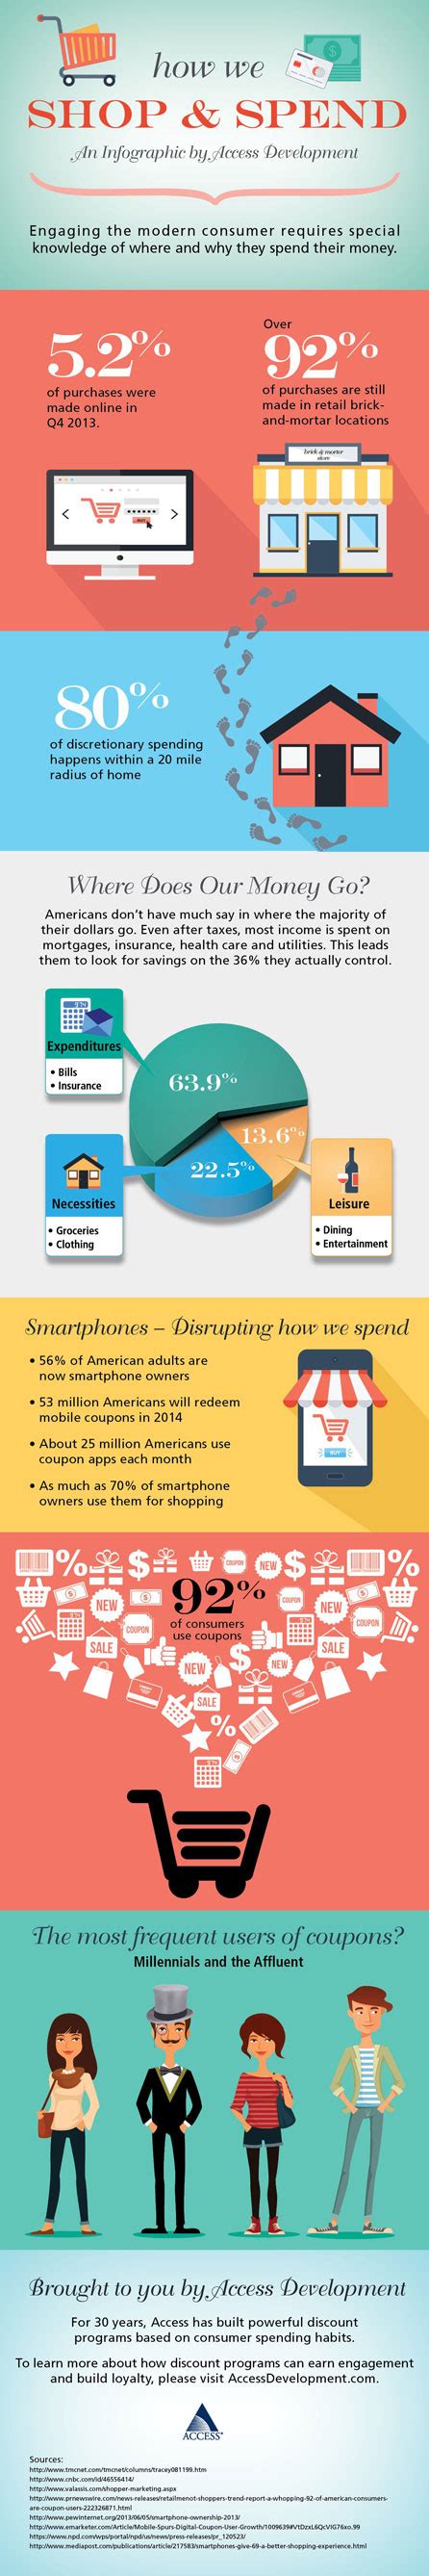 A Look At How The Modern Consumer Spends Their Money Infographic